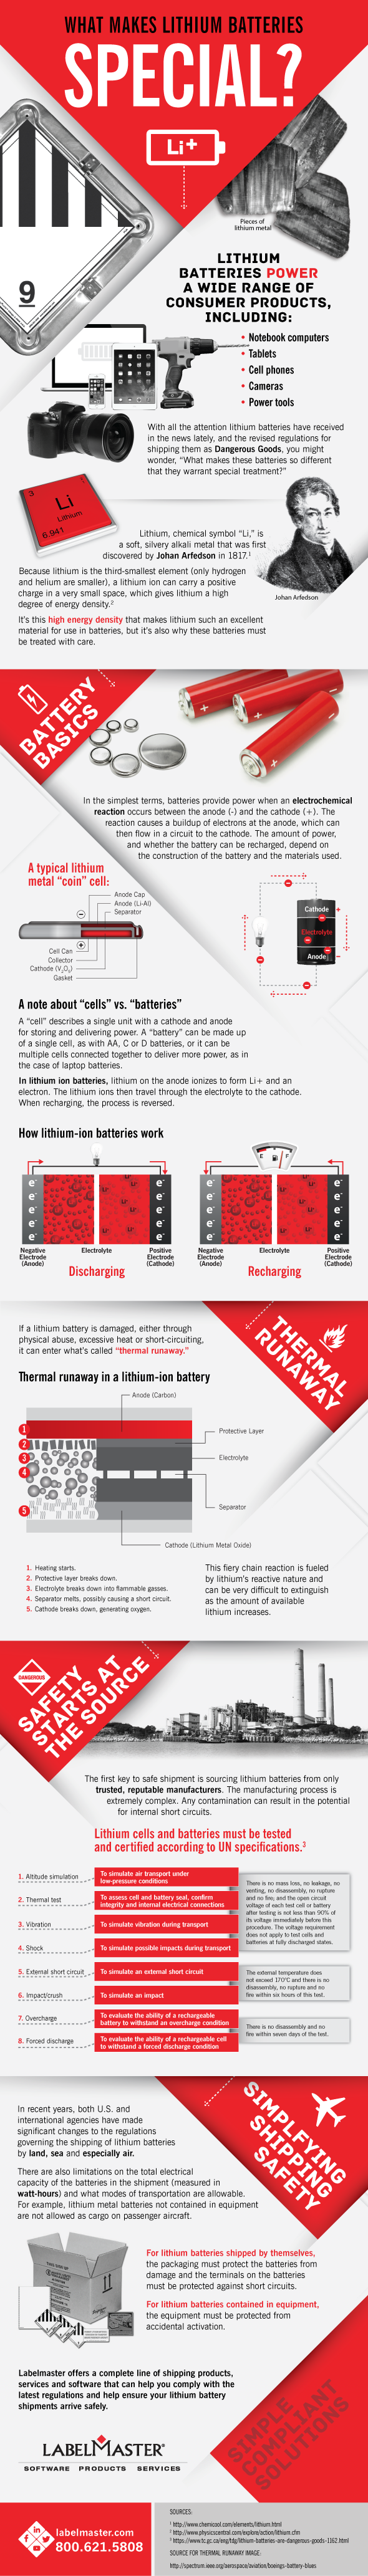 why_lithium_batteries_special_infographic